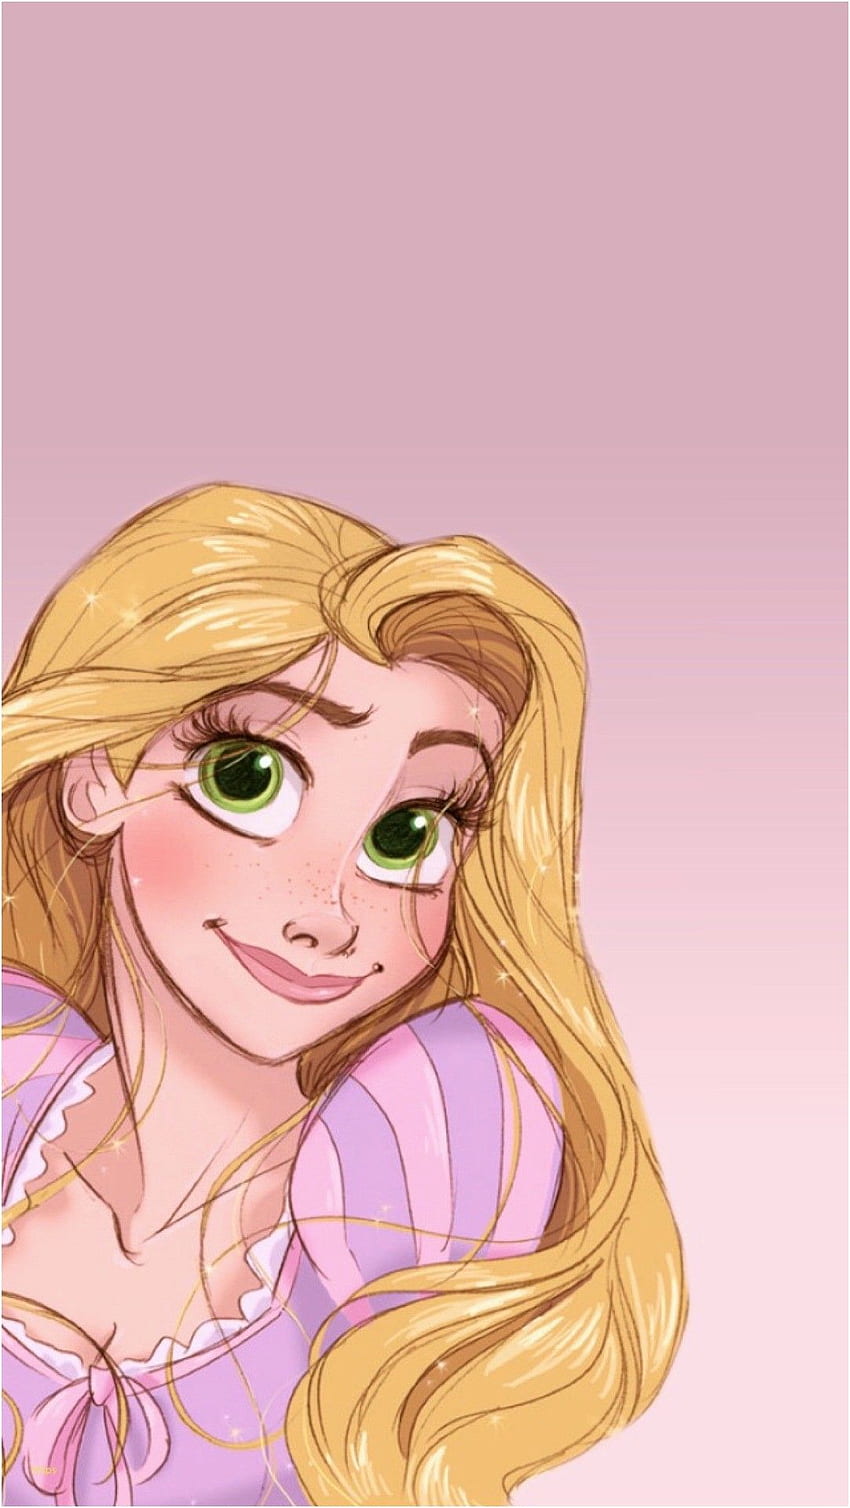 A digital painting of Rapunzel from the Disney movie Tangled. - Rapunzel